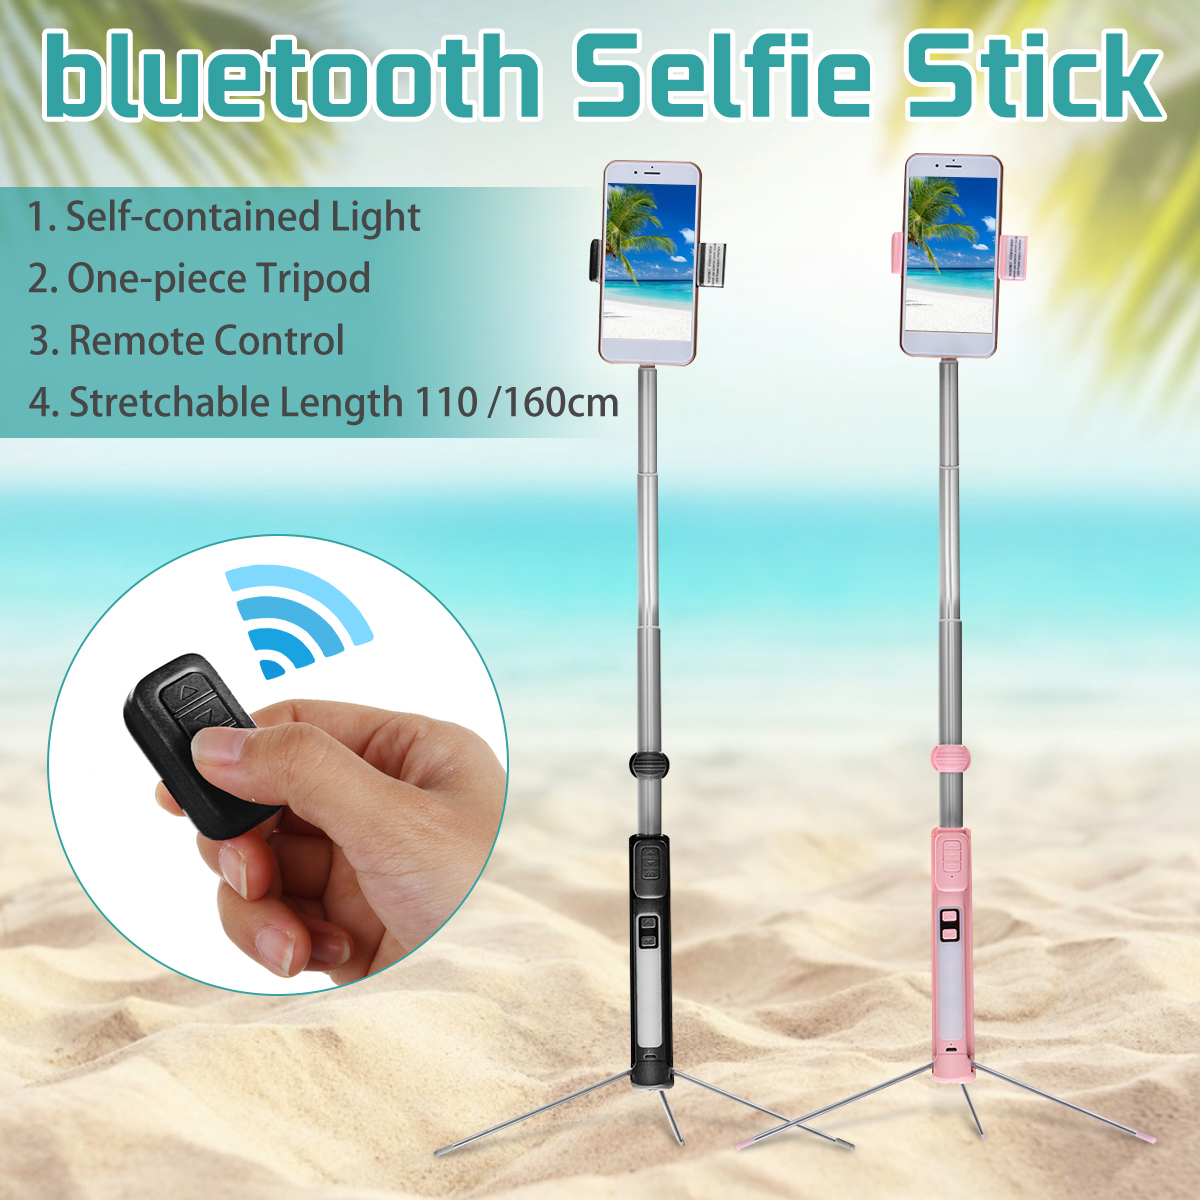 Mini-bluetooth-Hand-held-Selfie-Stick-Remote-Control-Multi-angle-Tripod-With-LED-Fill-Light-for-Live-1538122-1